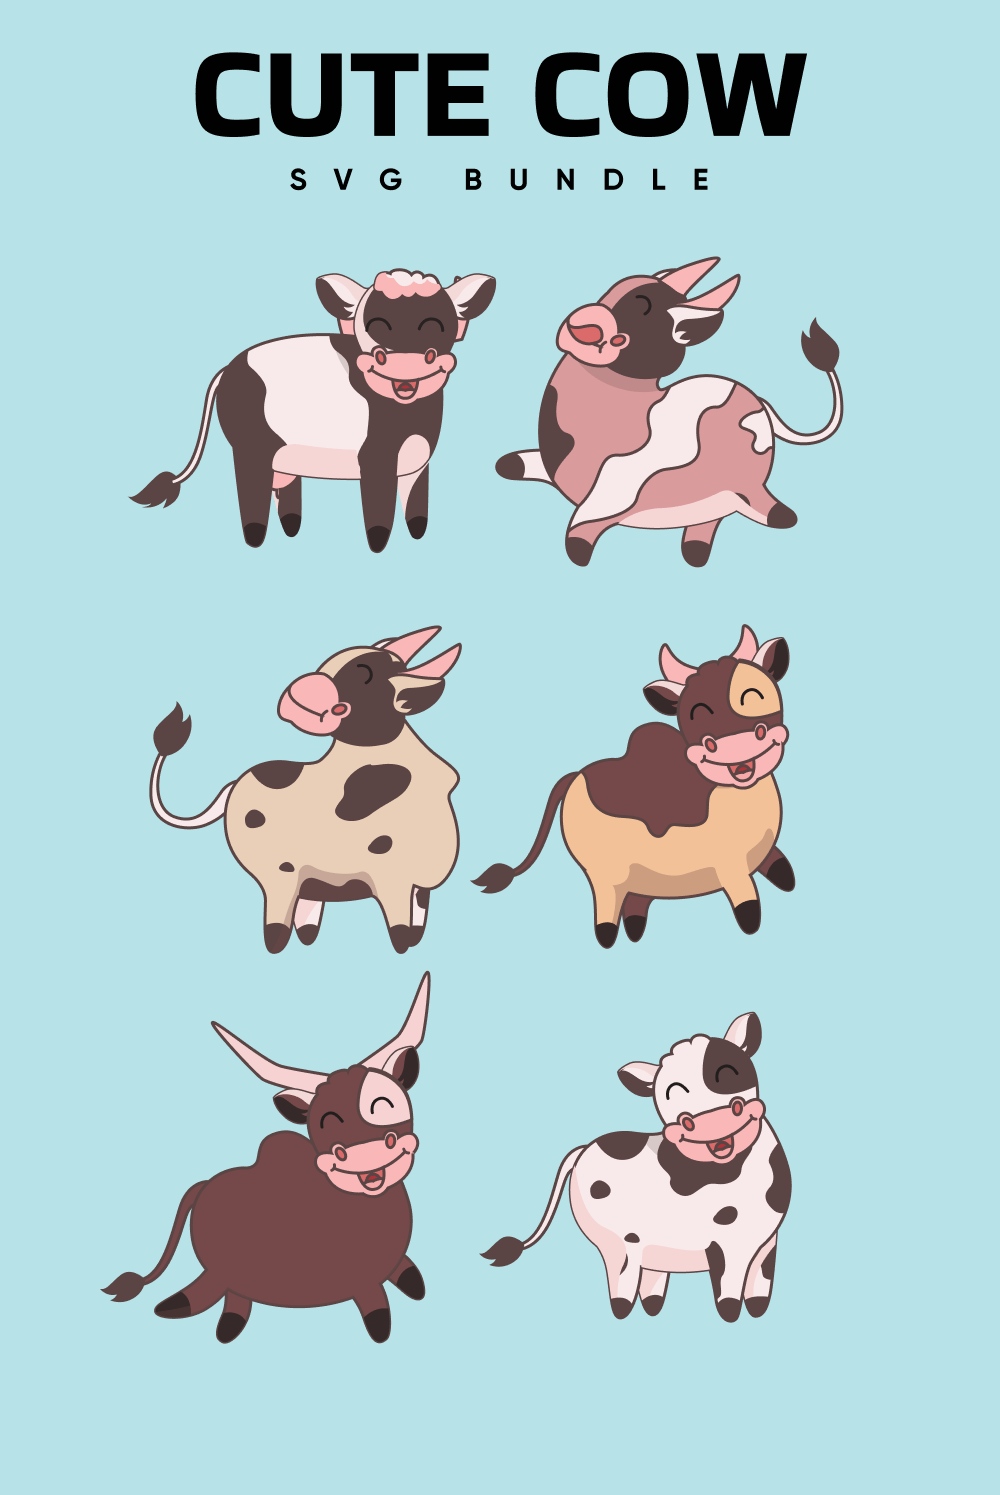 Image of adult cows with big horns living happily.